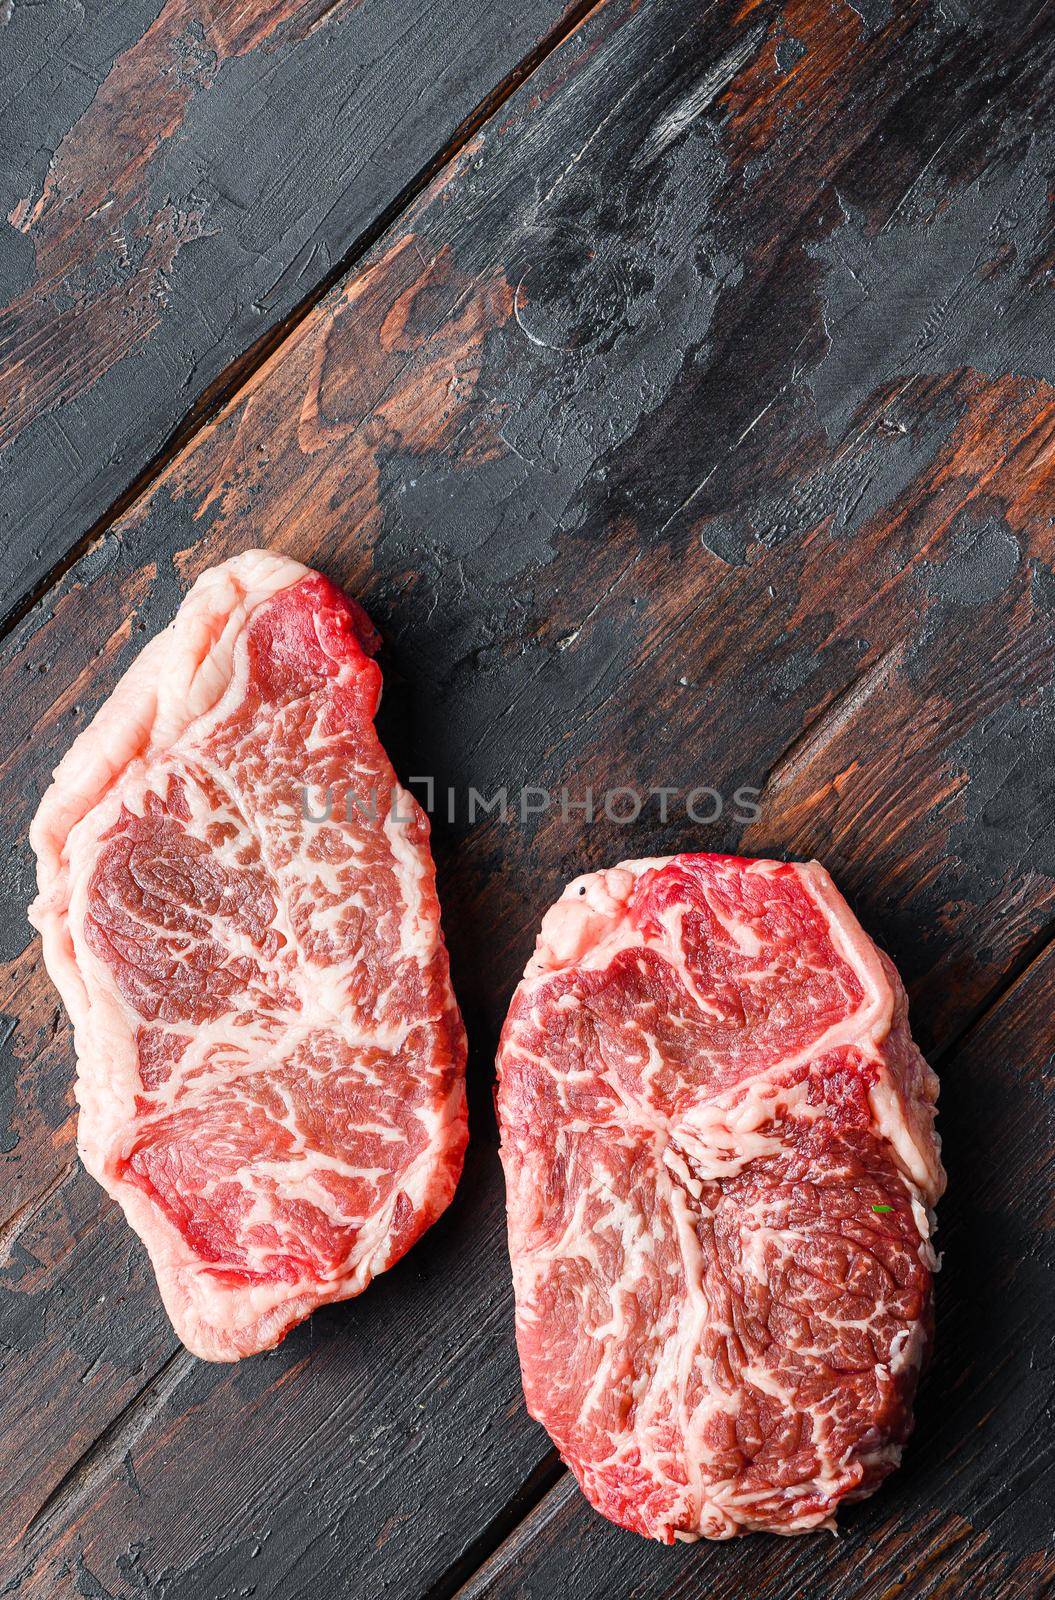 Top blade organic meat cut, raw marbled beef steak, On dark wooden background, top view with space for text. by Ilianesolenyi